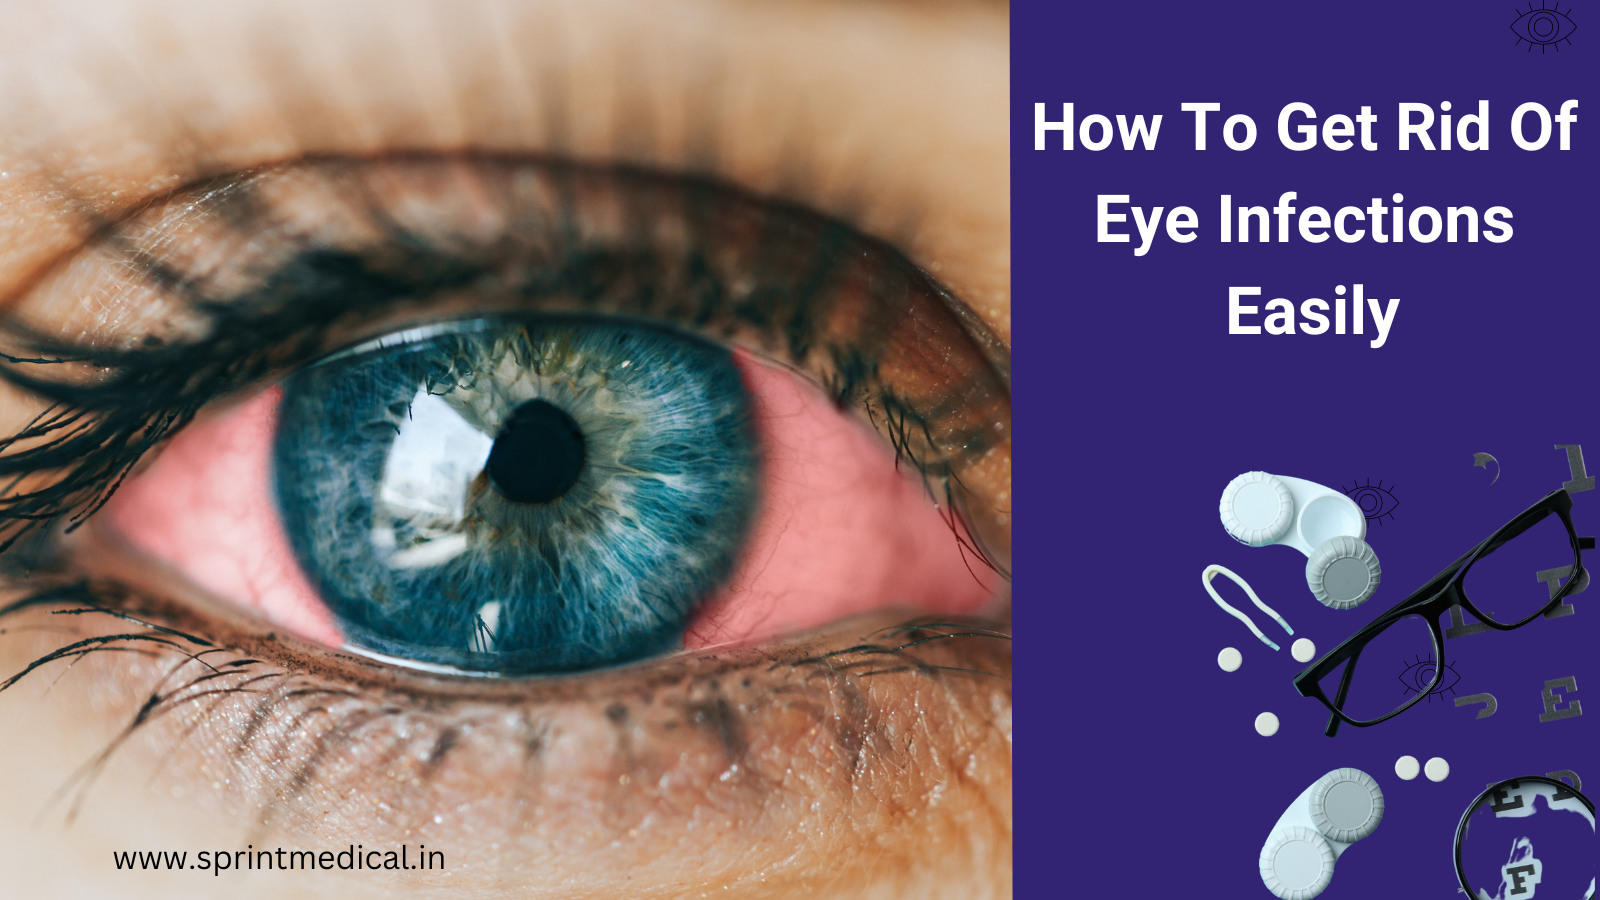 How To Get Rid Of Eye Infections Easily